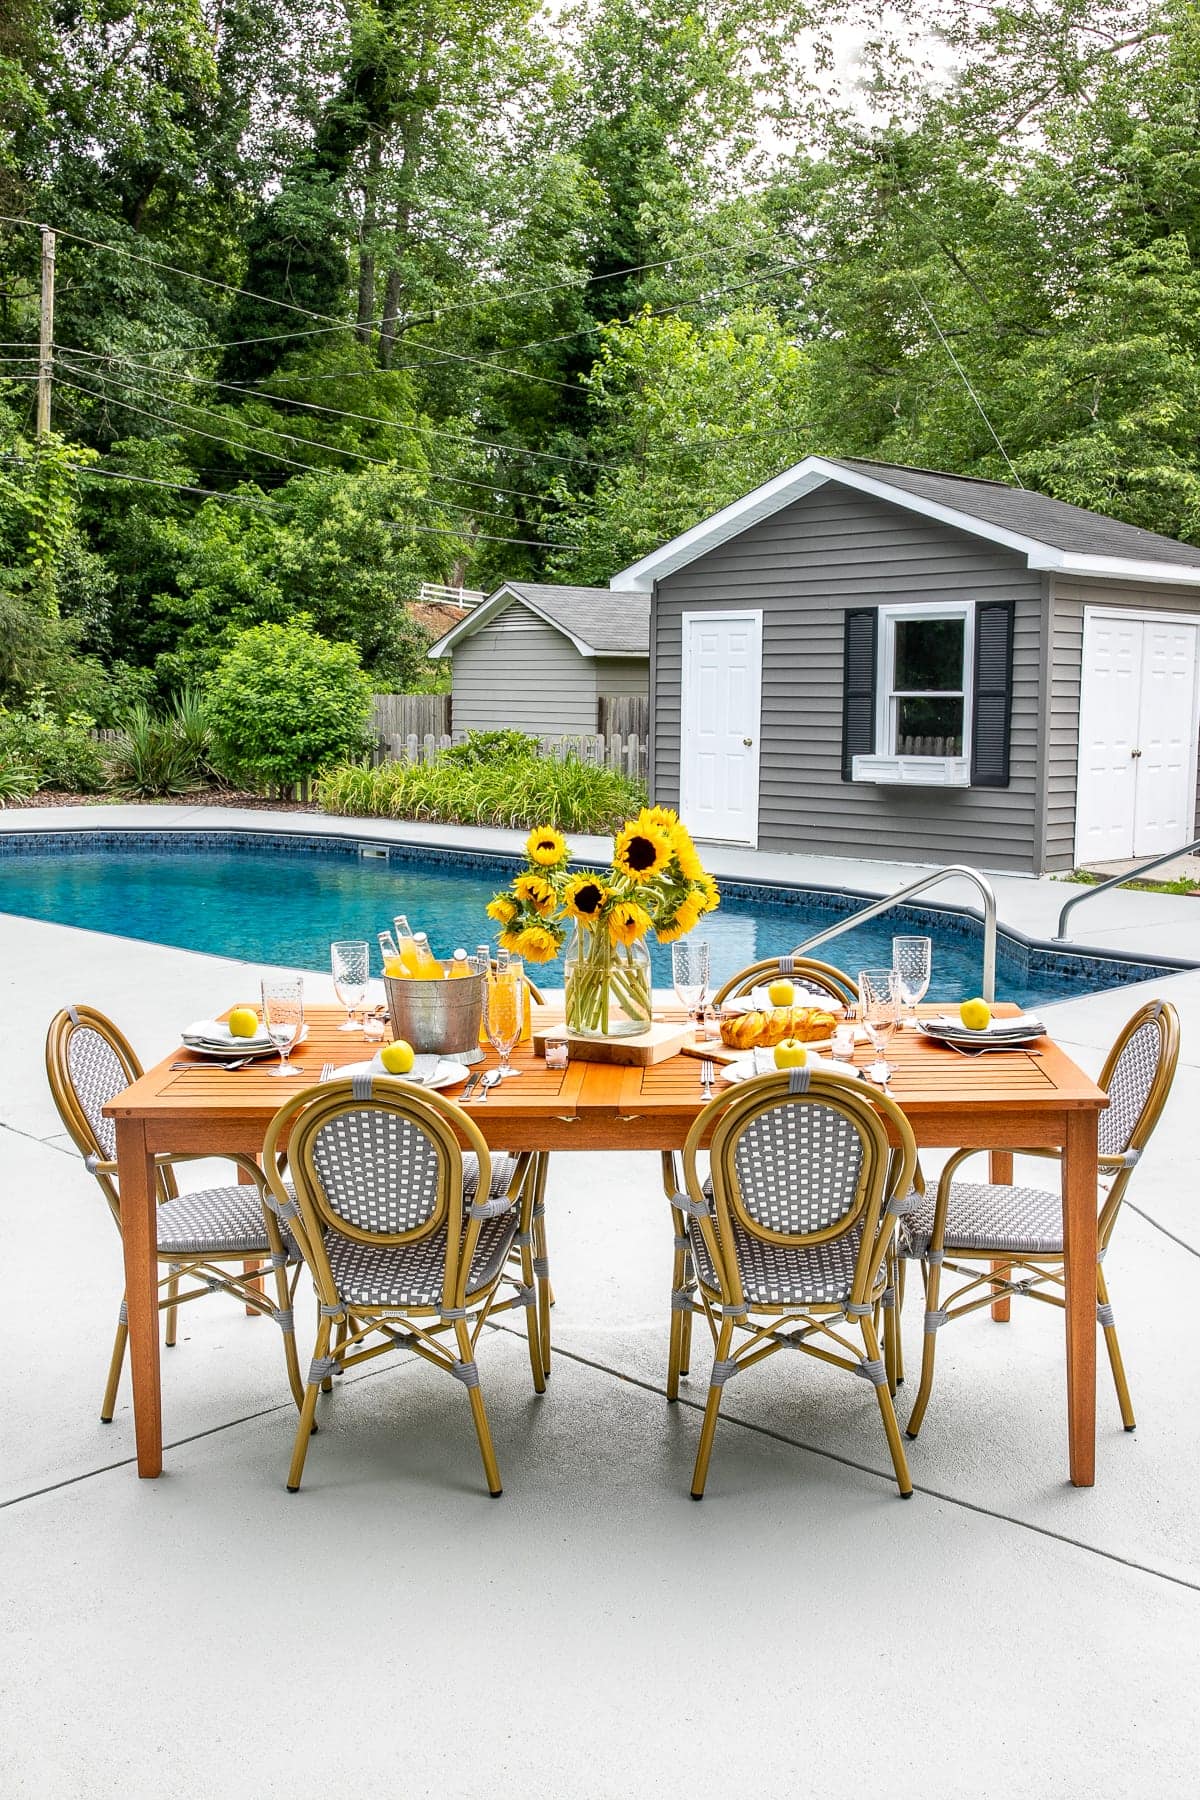 concrete pool deck with patio dining table and chairs